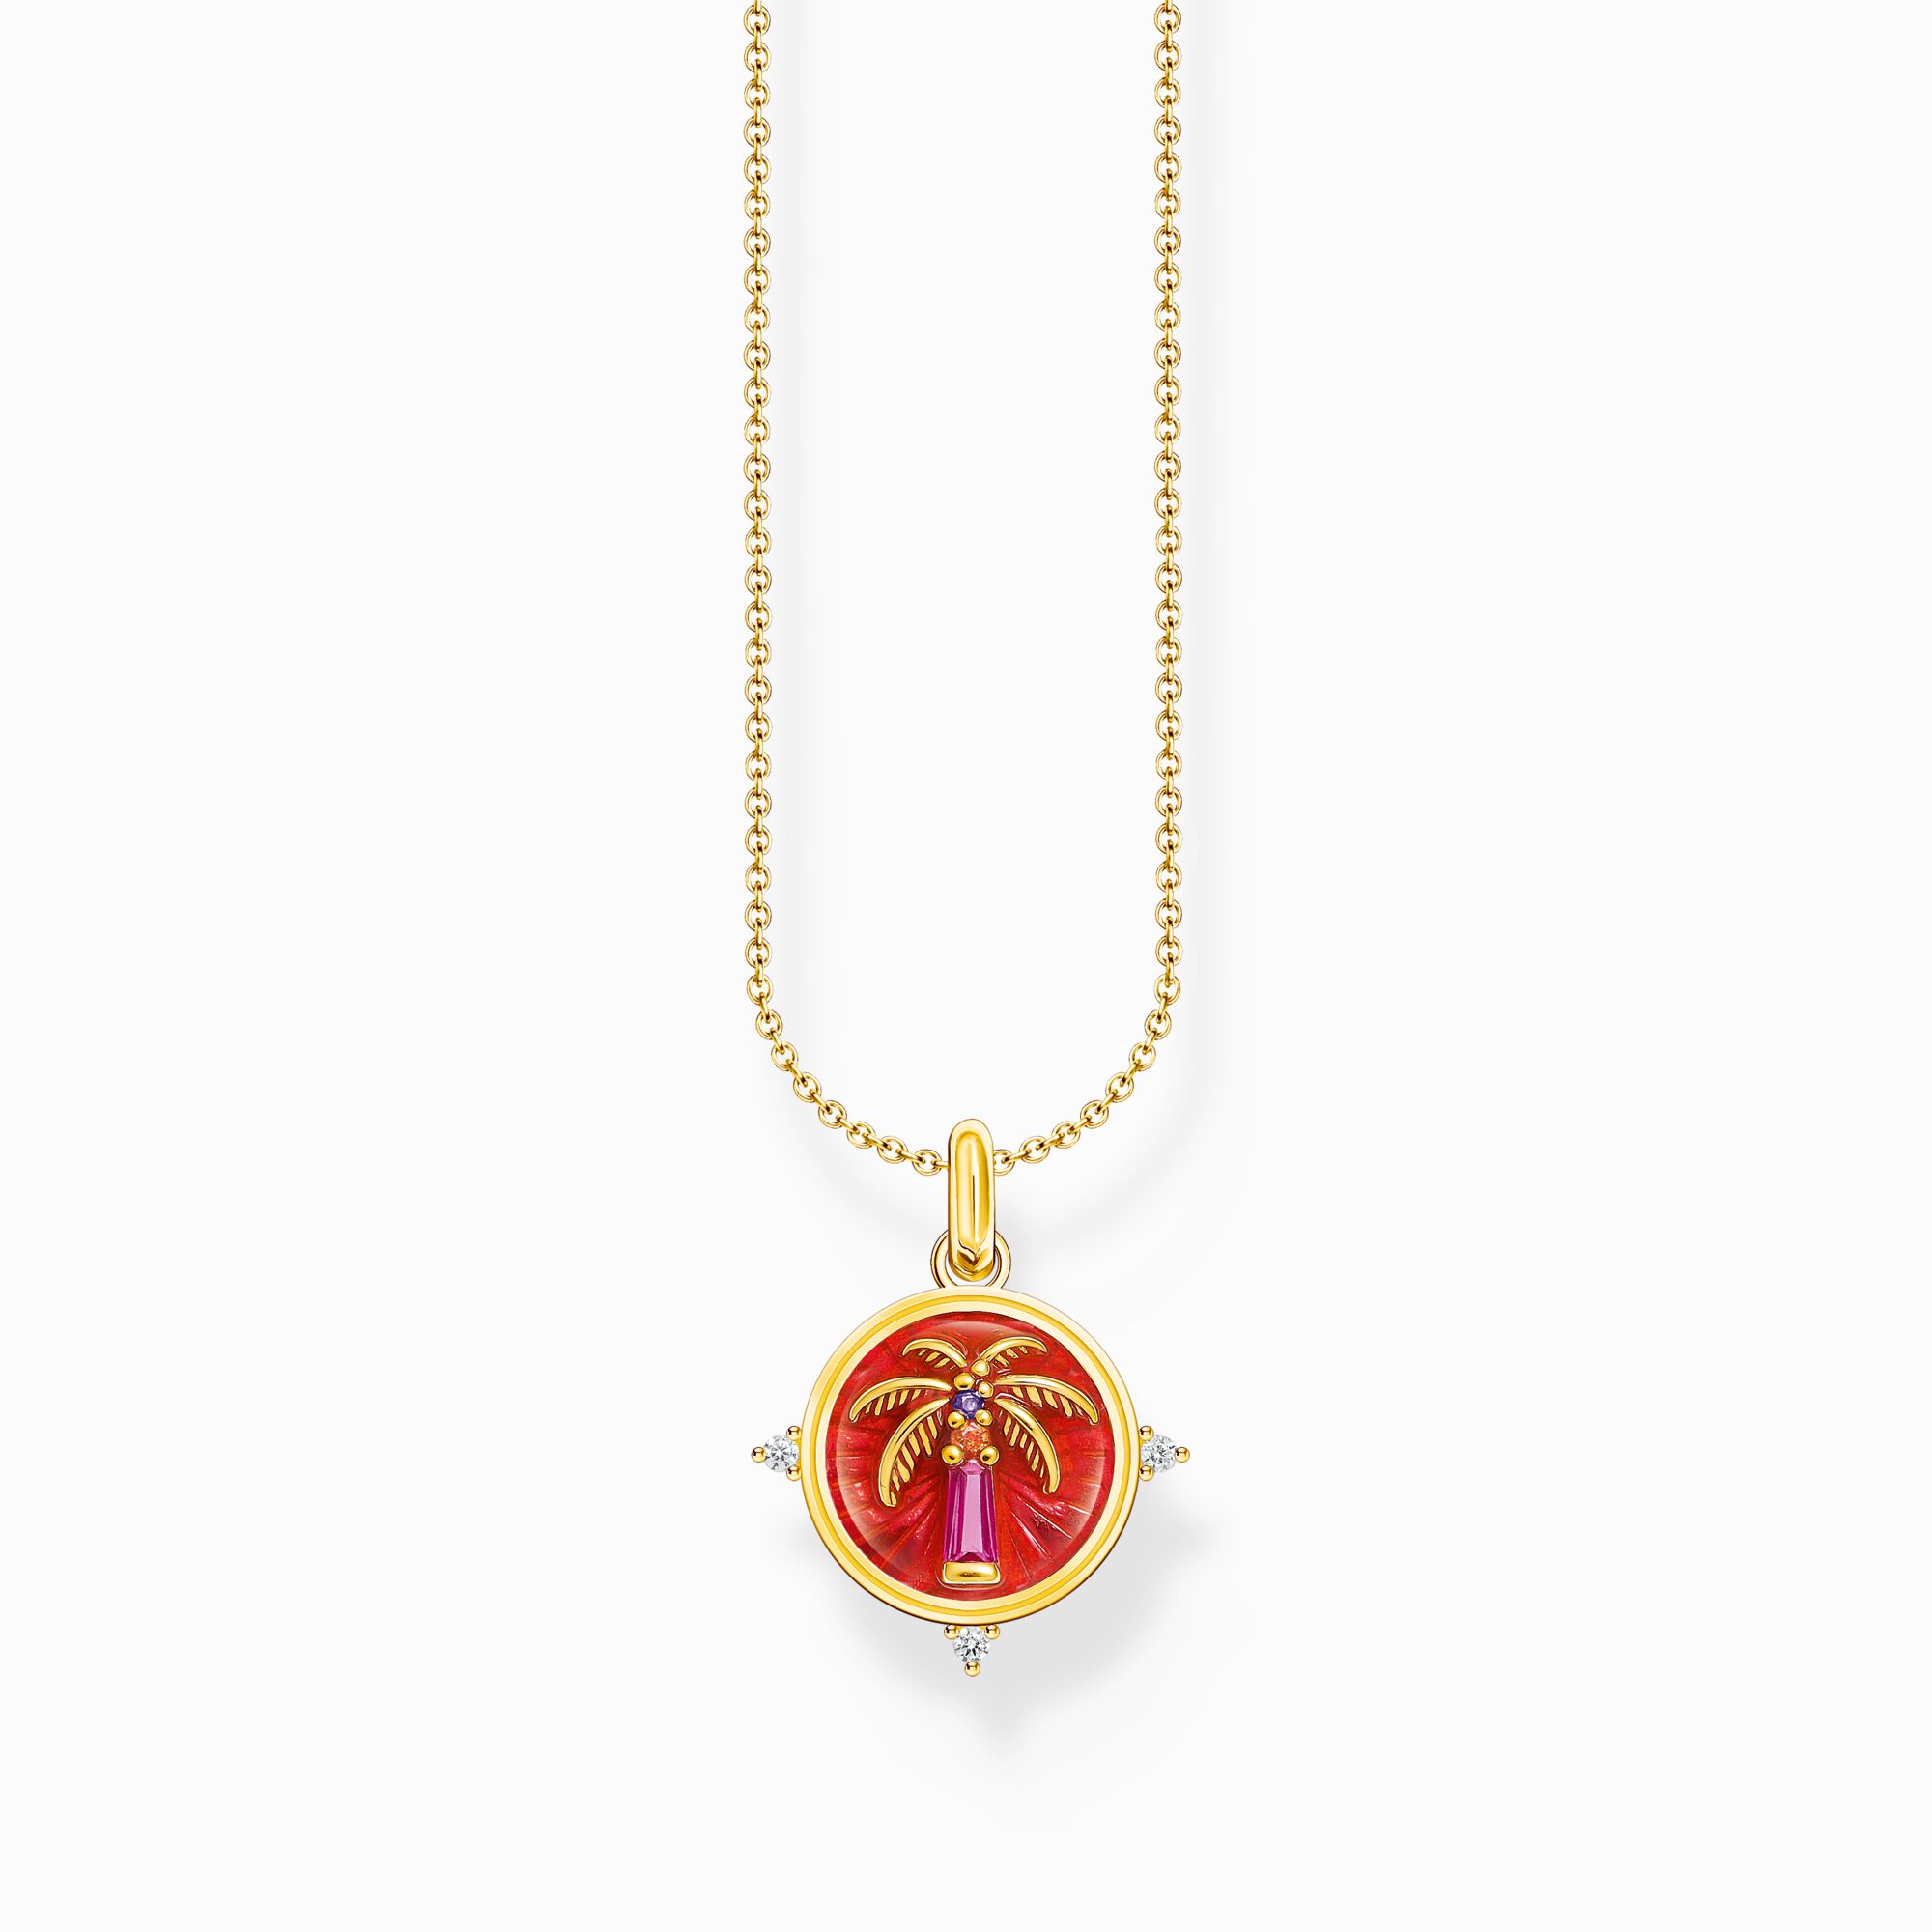 Gold-plated necklace with palm tree pendant and colourful stones from the Charming Collection collection in the THOMAS SABO online store